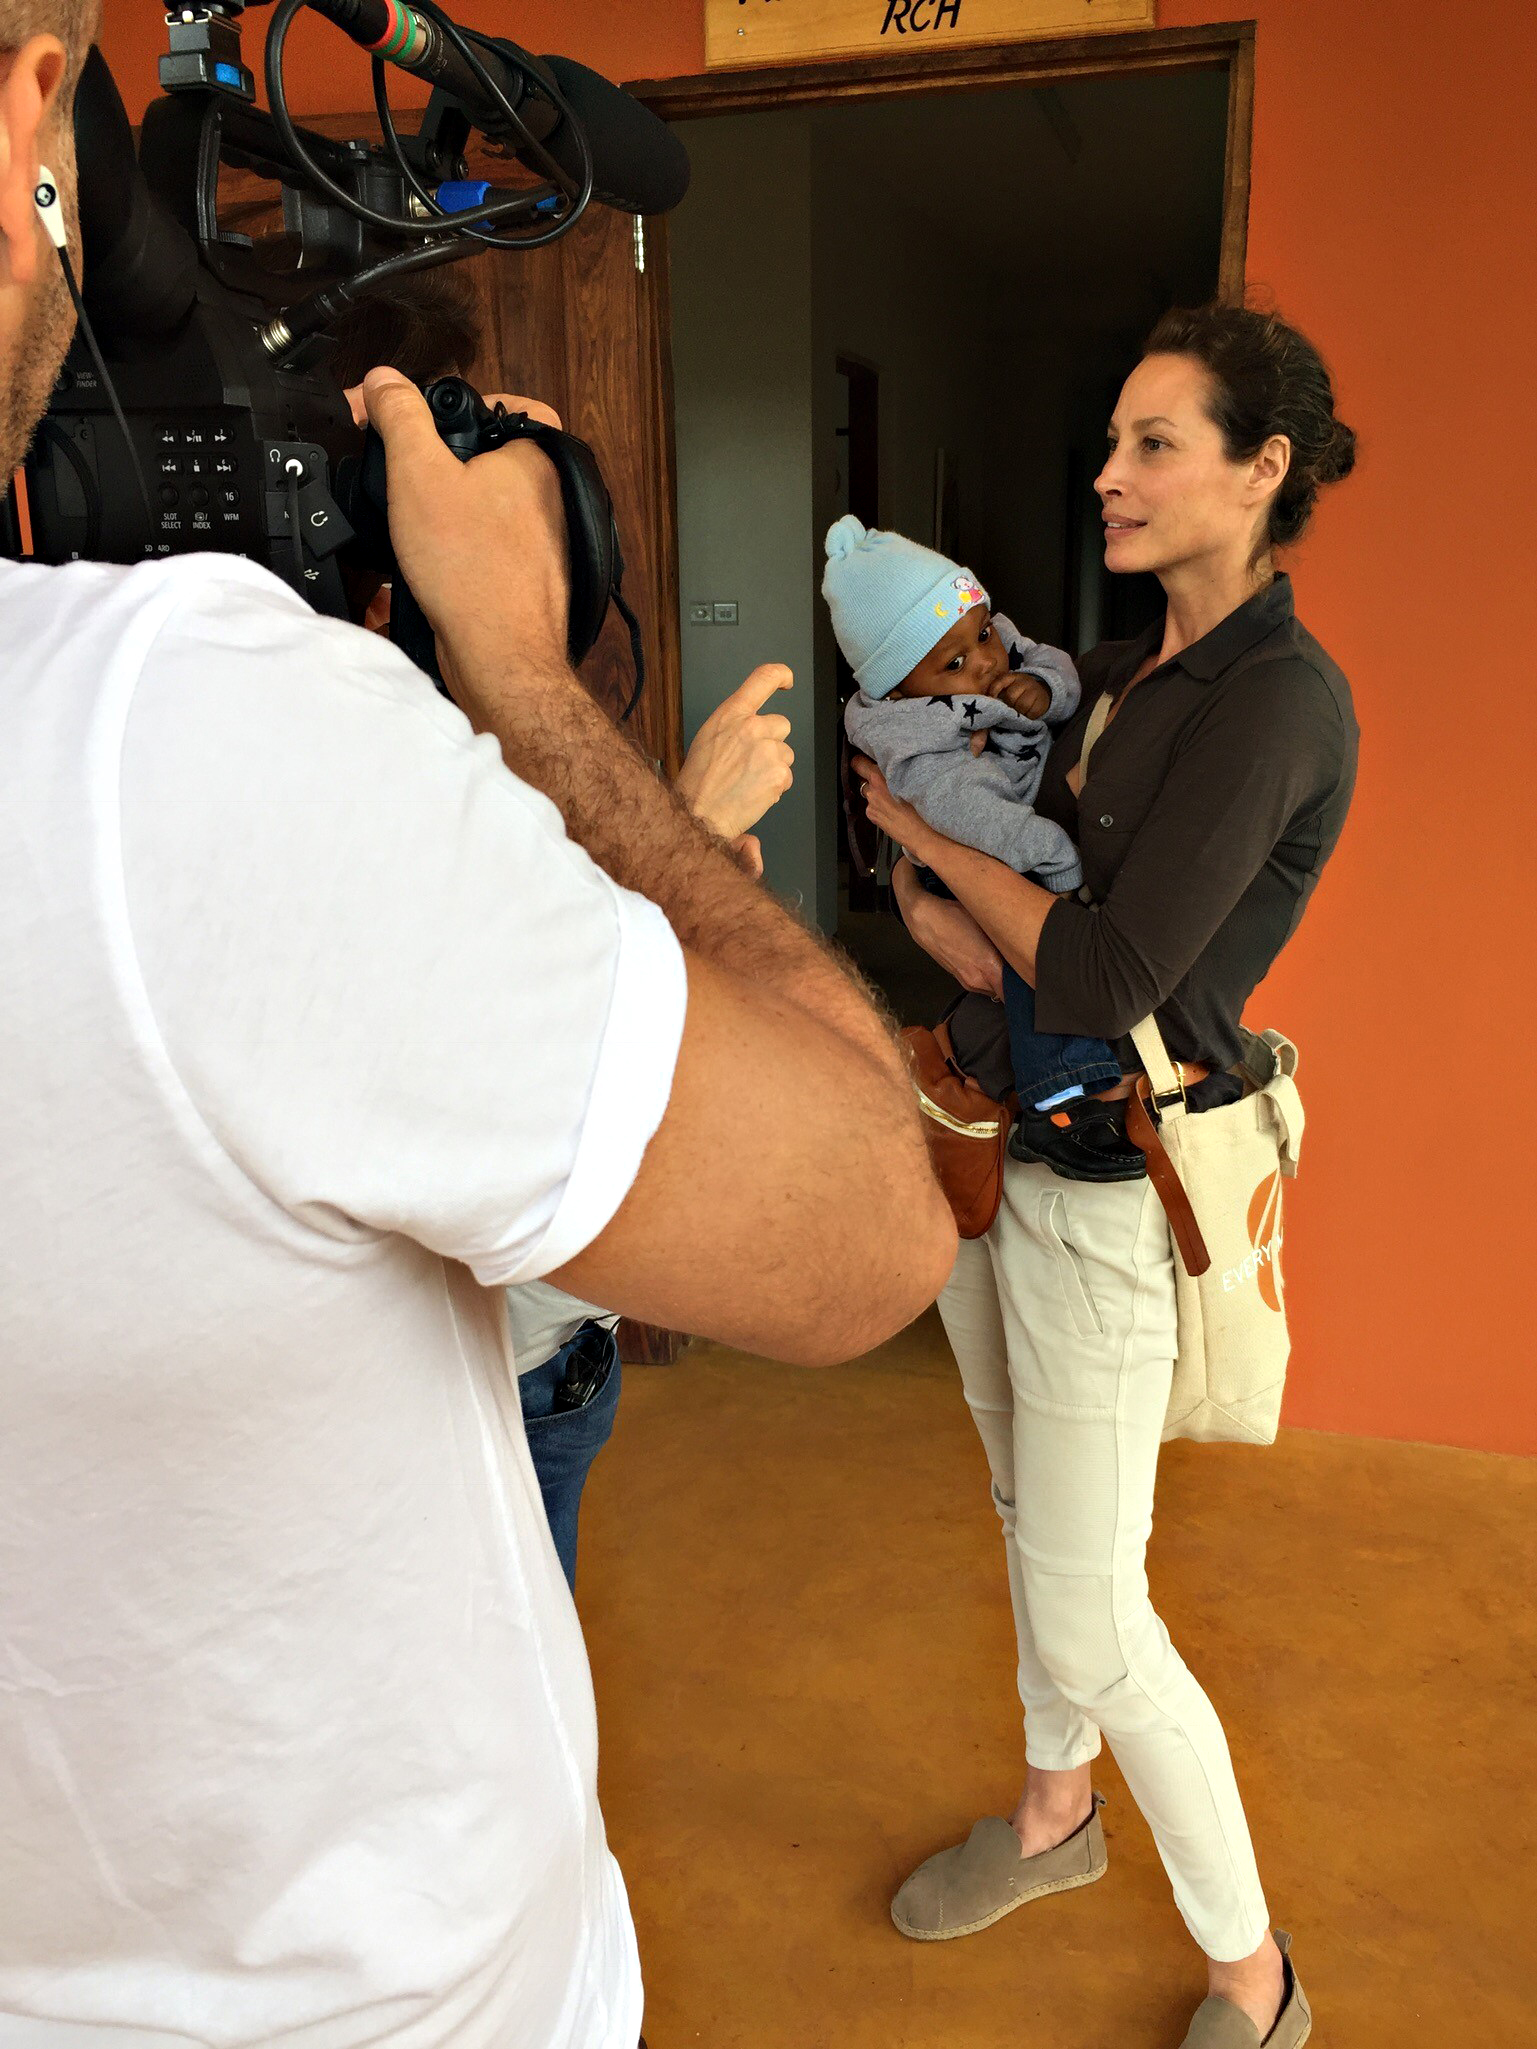 PHOTO: Christy Turlington Burns with baby Jordan who is visiting F.A.M.E. (Foundation for African Medicine and Education) medical hospital for a check-up.